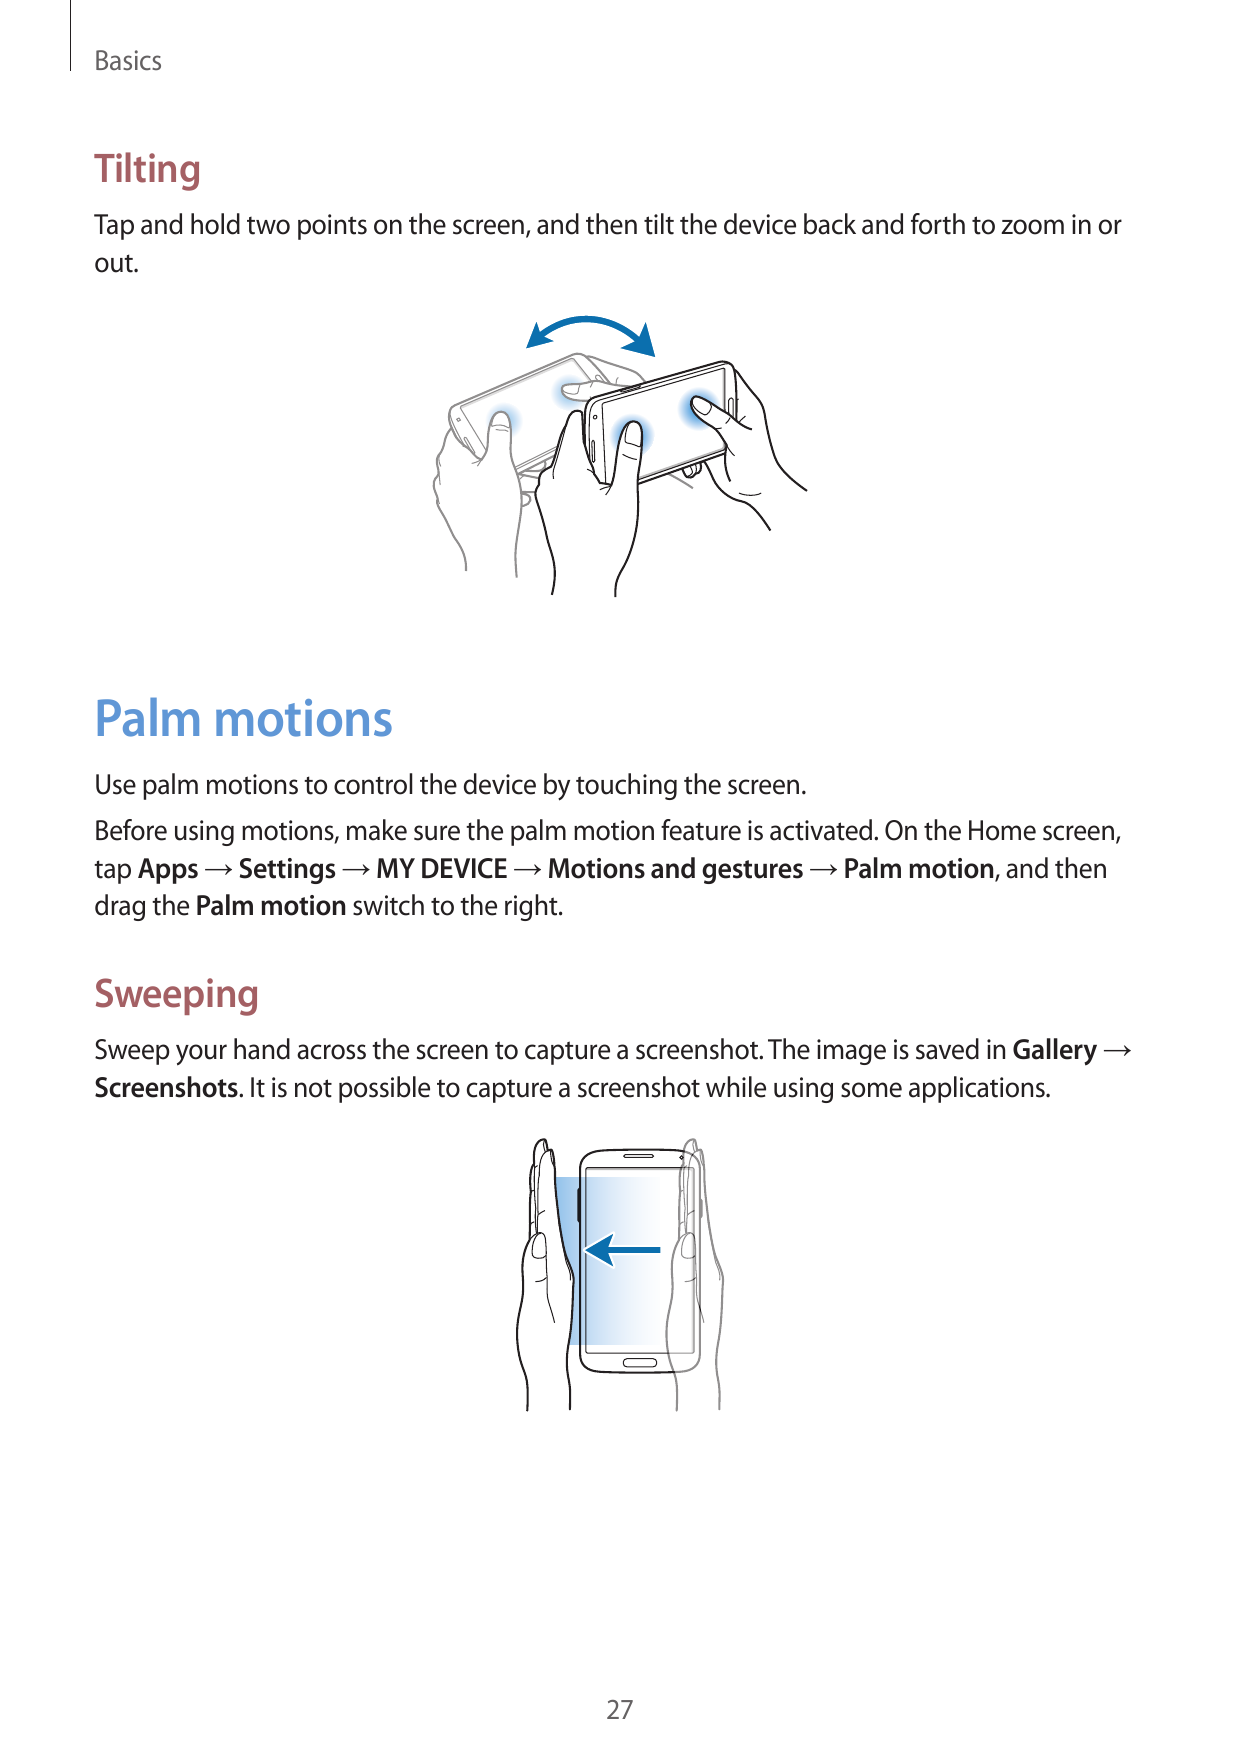 BasicsTiltingTap and hold two points on the screen, and then tilt the device back and forth to zoom in orout.Palm motionsUse pal